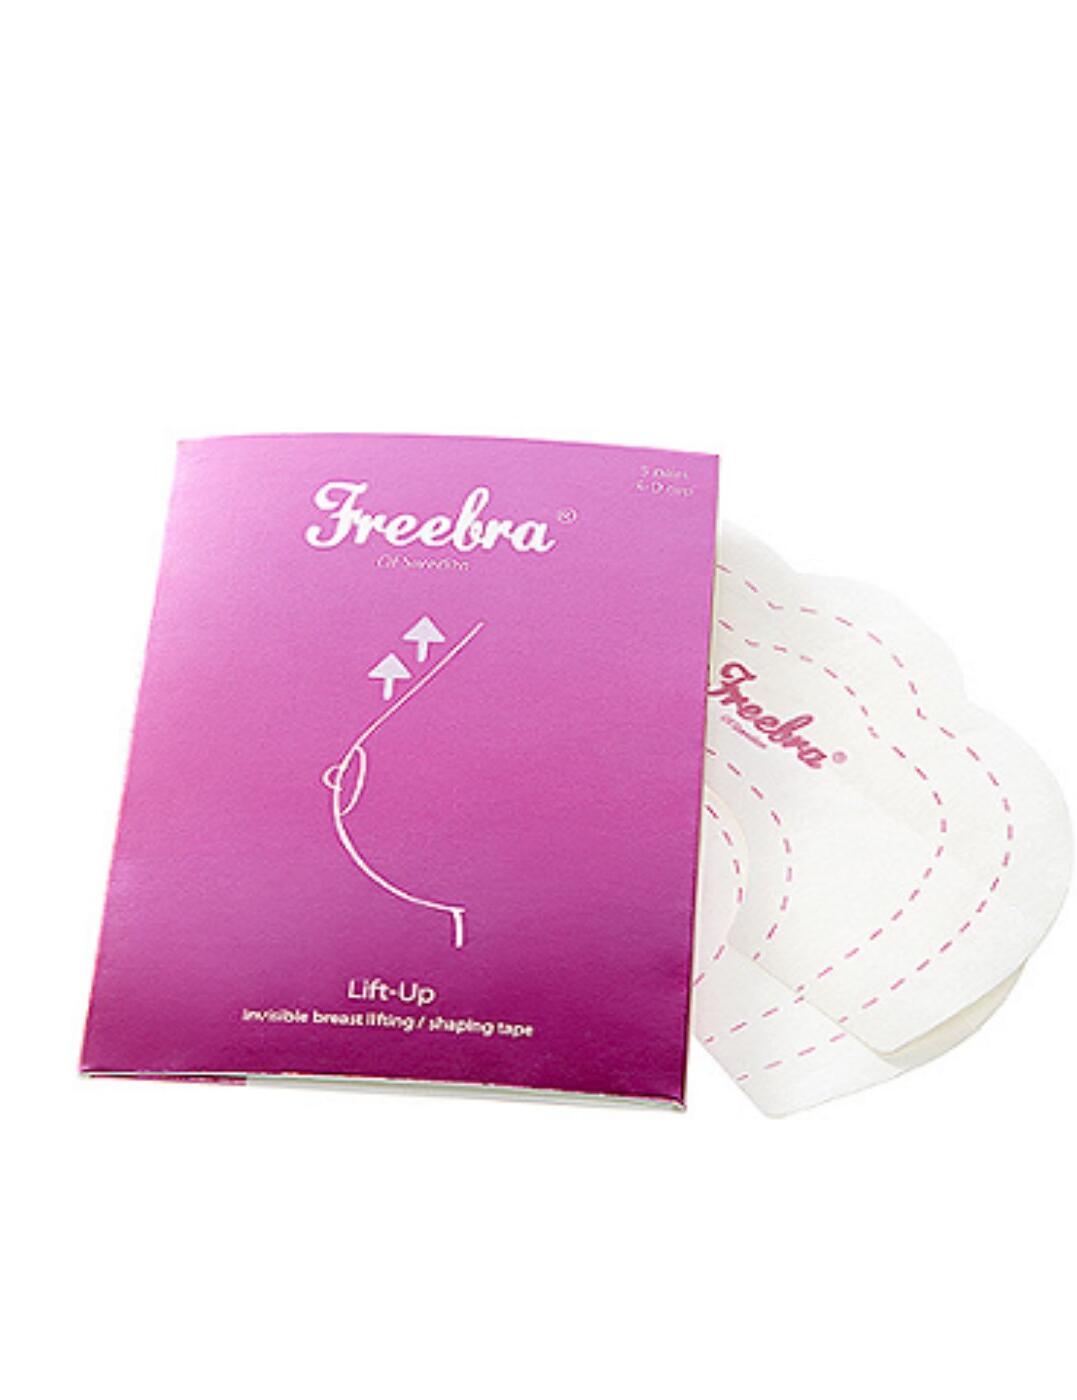 Freebra Lift Up Bra Tape Sheets (5 Pairs Pack) - Clear (Transparent)